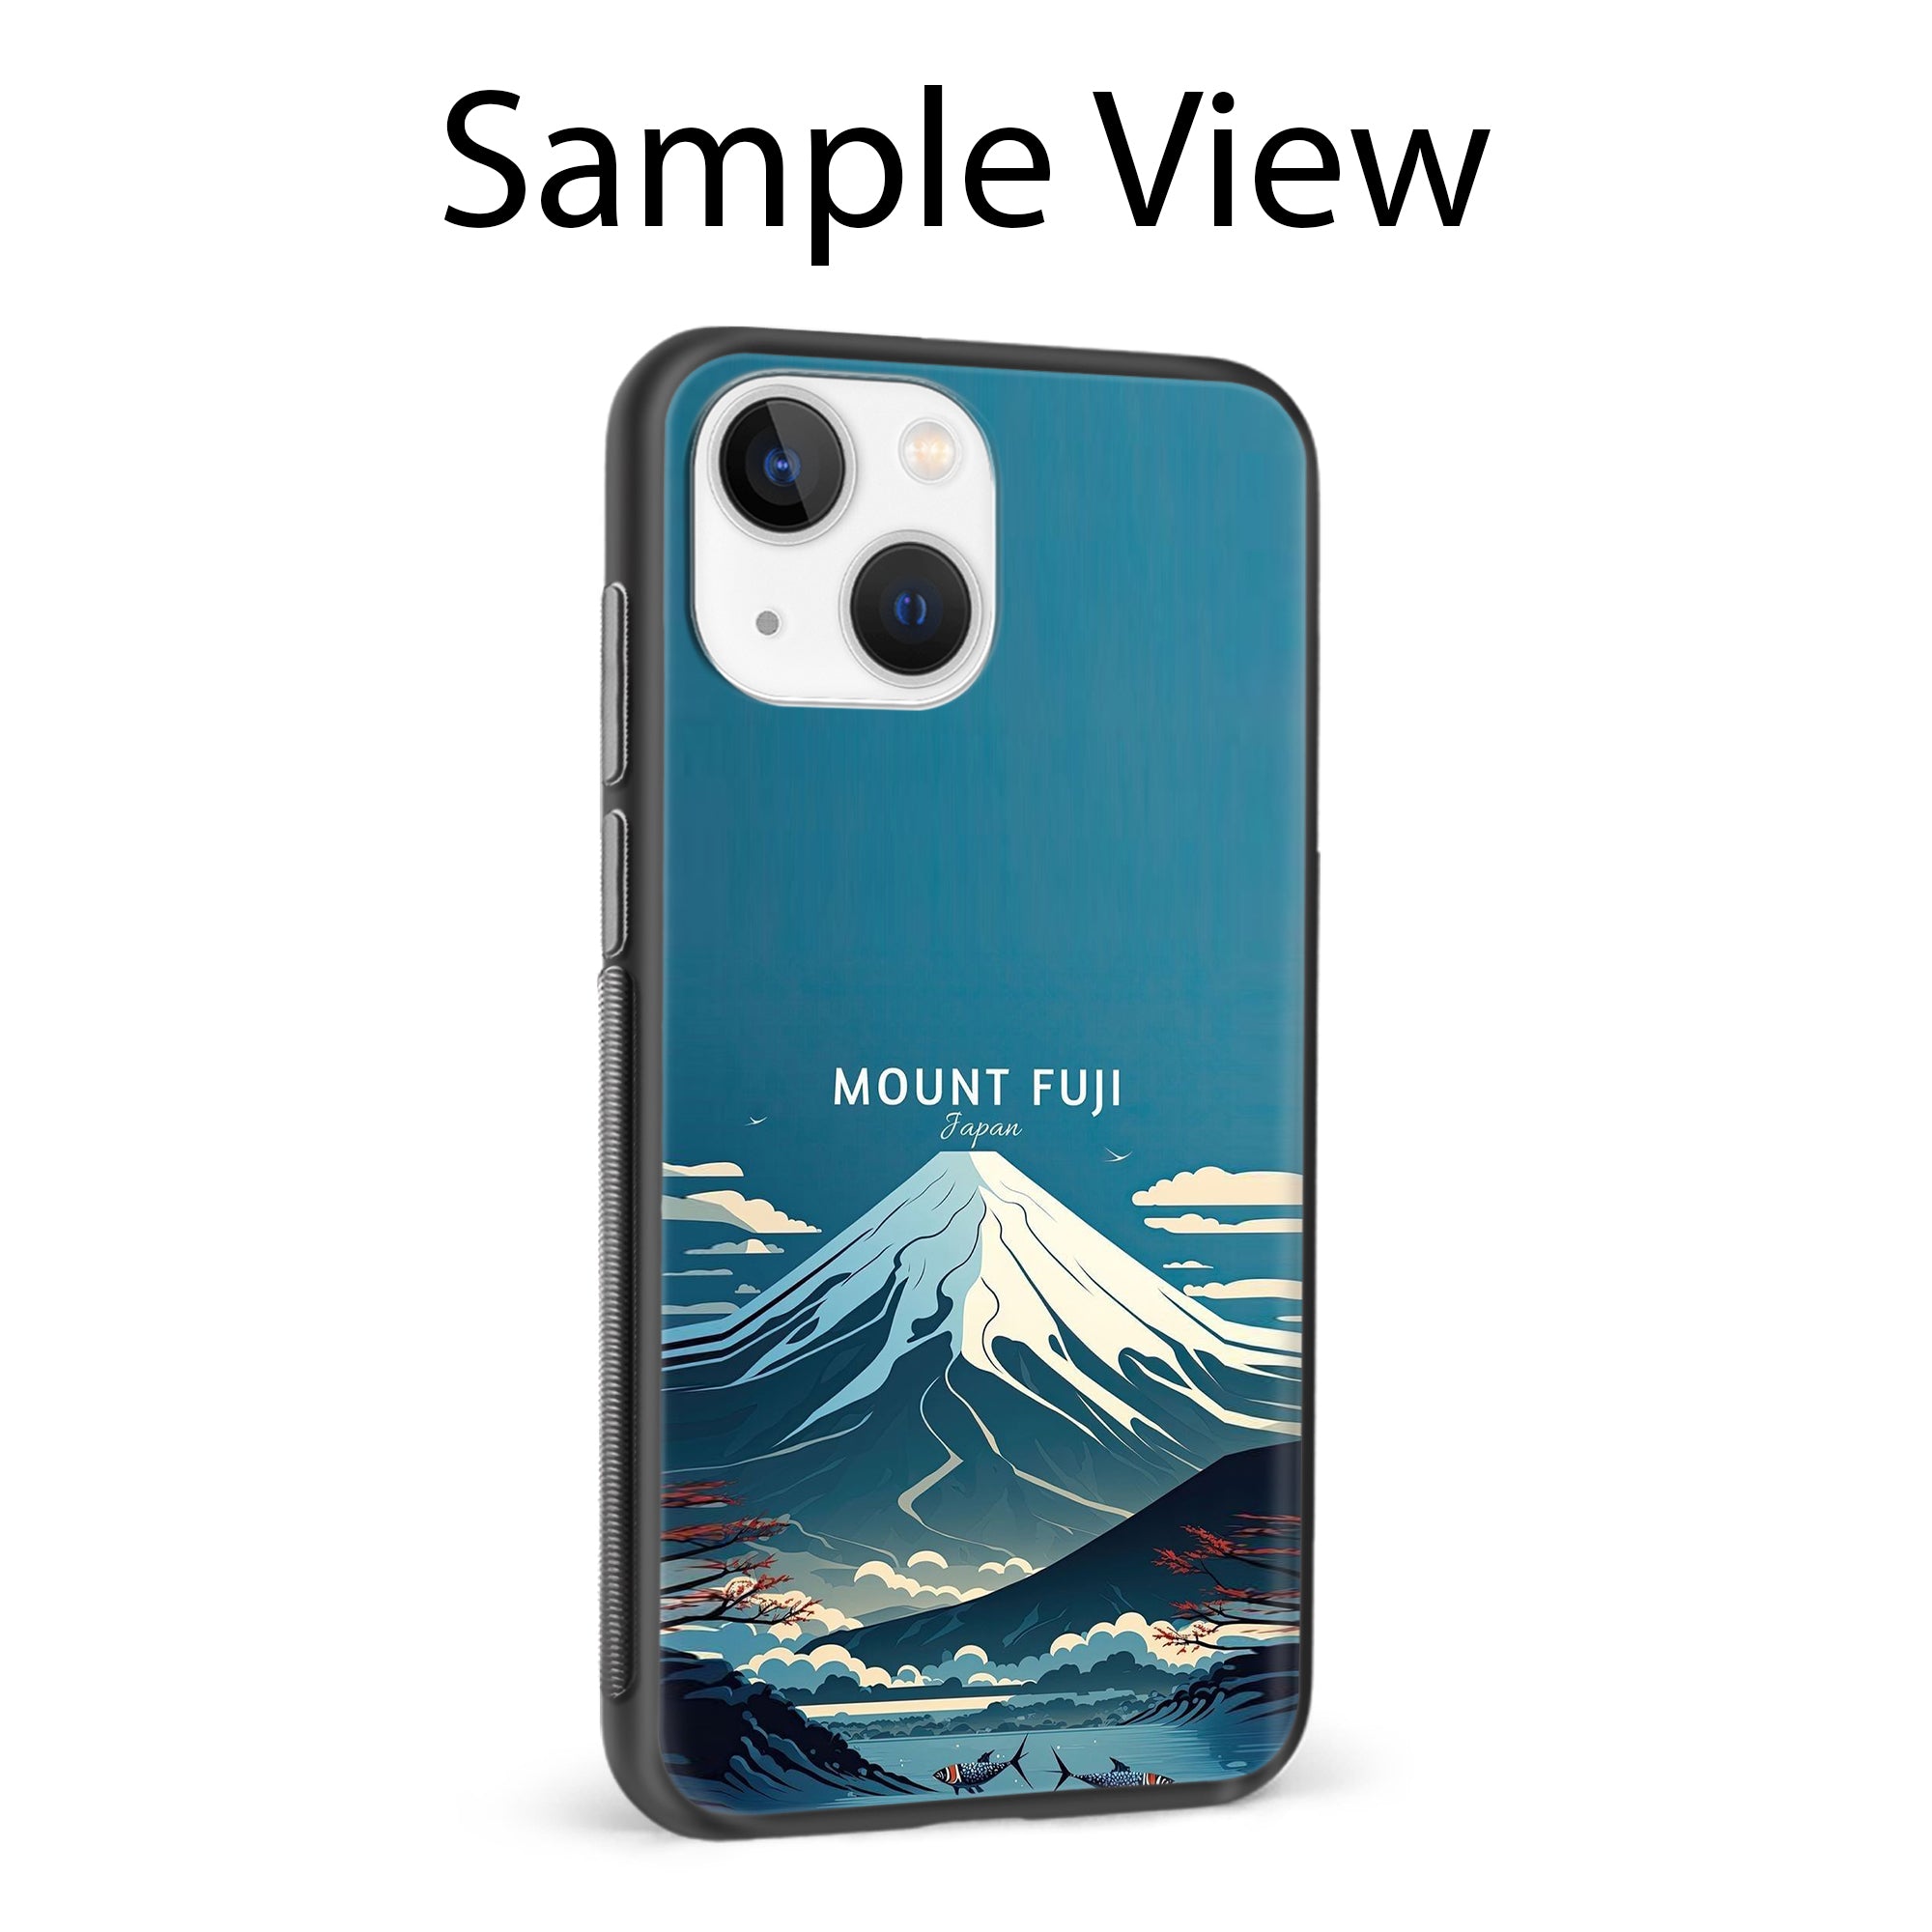 Buy Mount Fuji Metal-Silicon Back Mobile Phone Case/Cover For Samsung Note 10 Plus (5G) Online